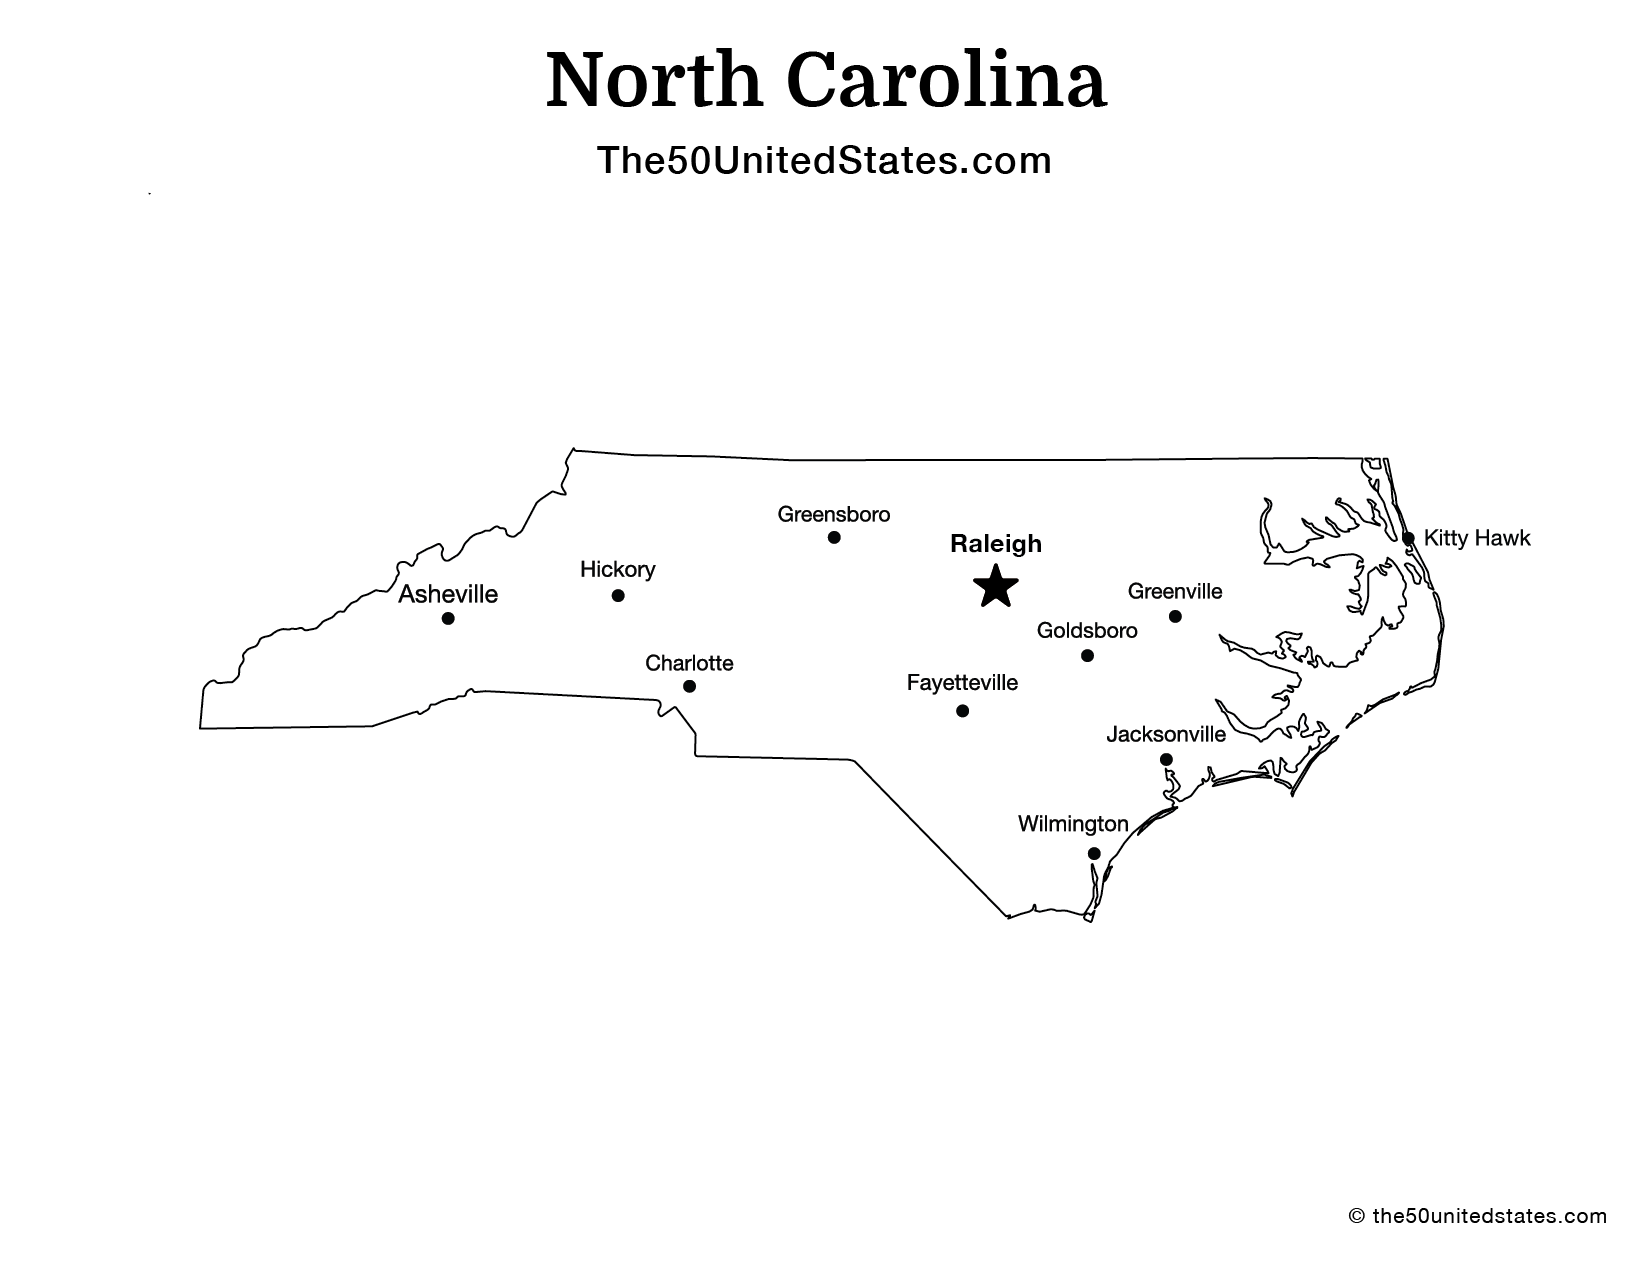 North Carolina with Cities (Labeled)